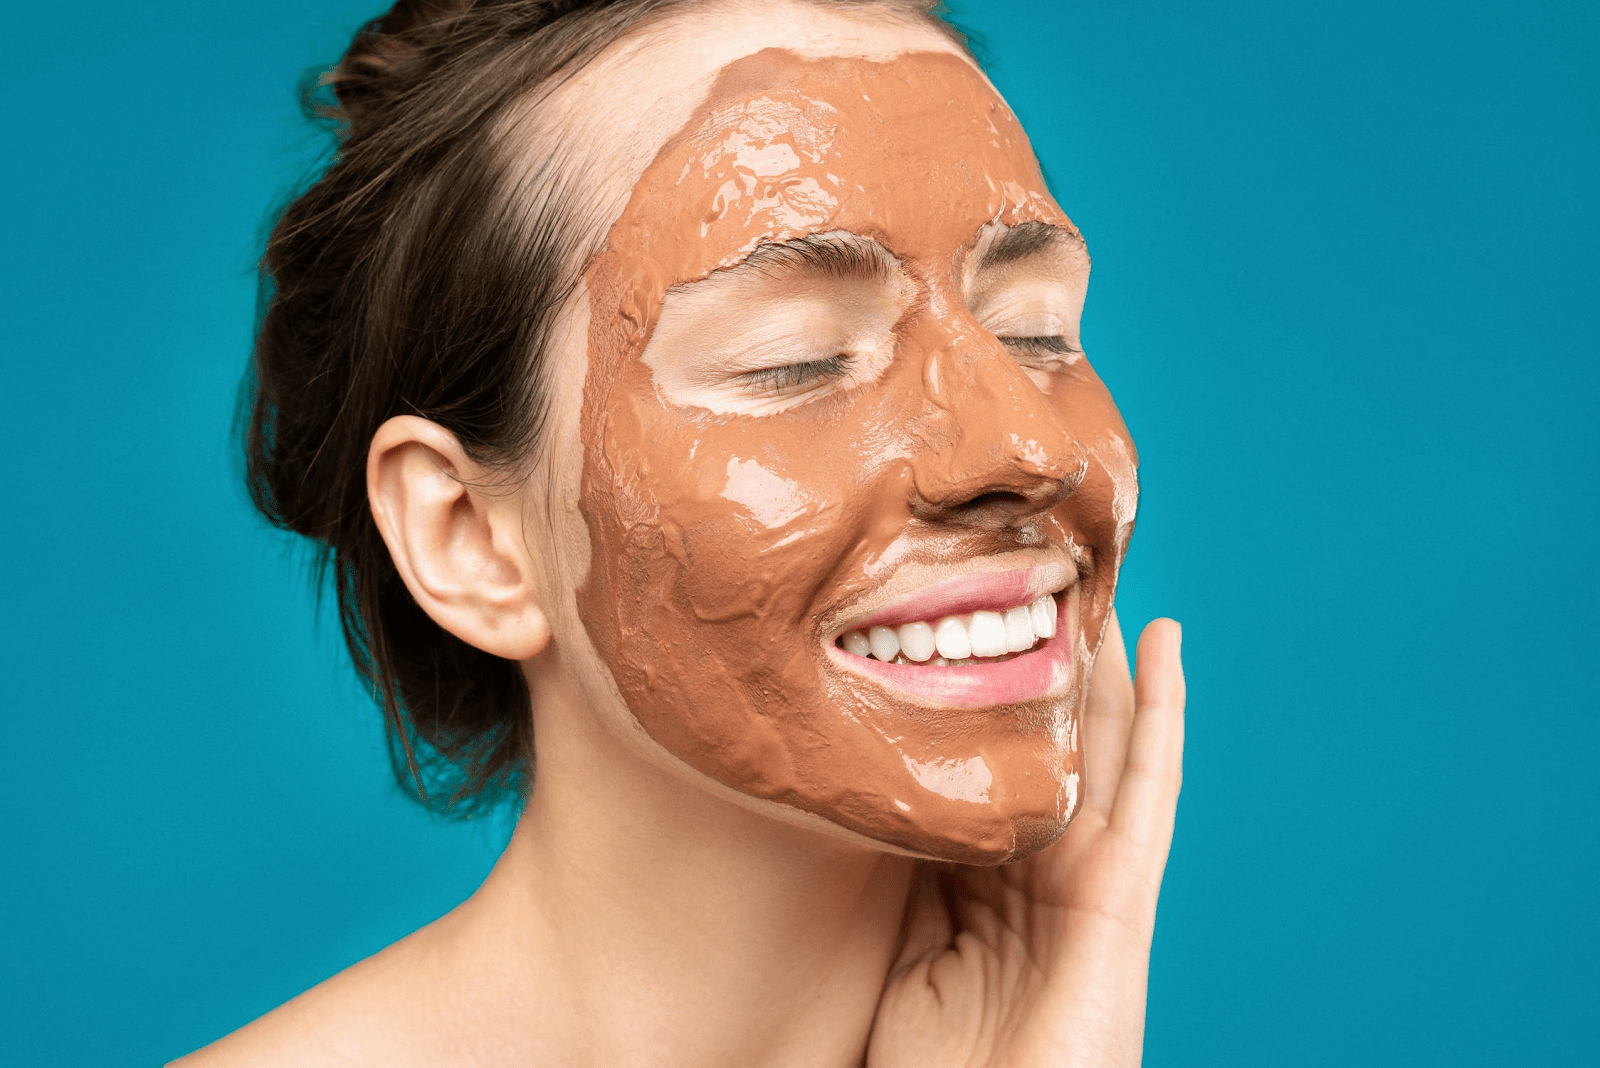 Home remedies for dull skin